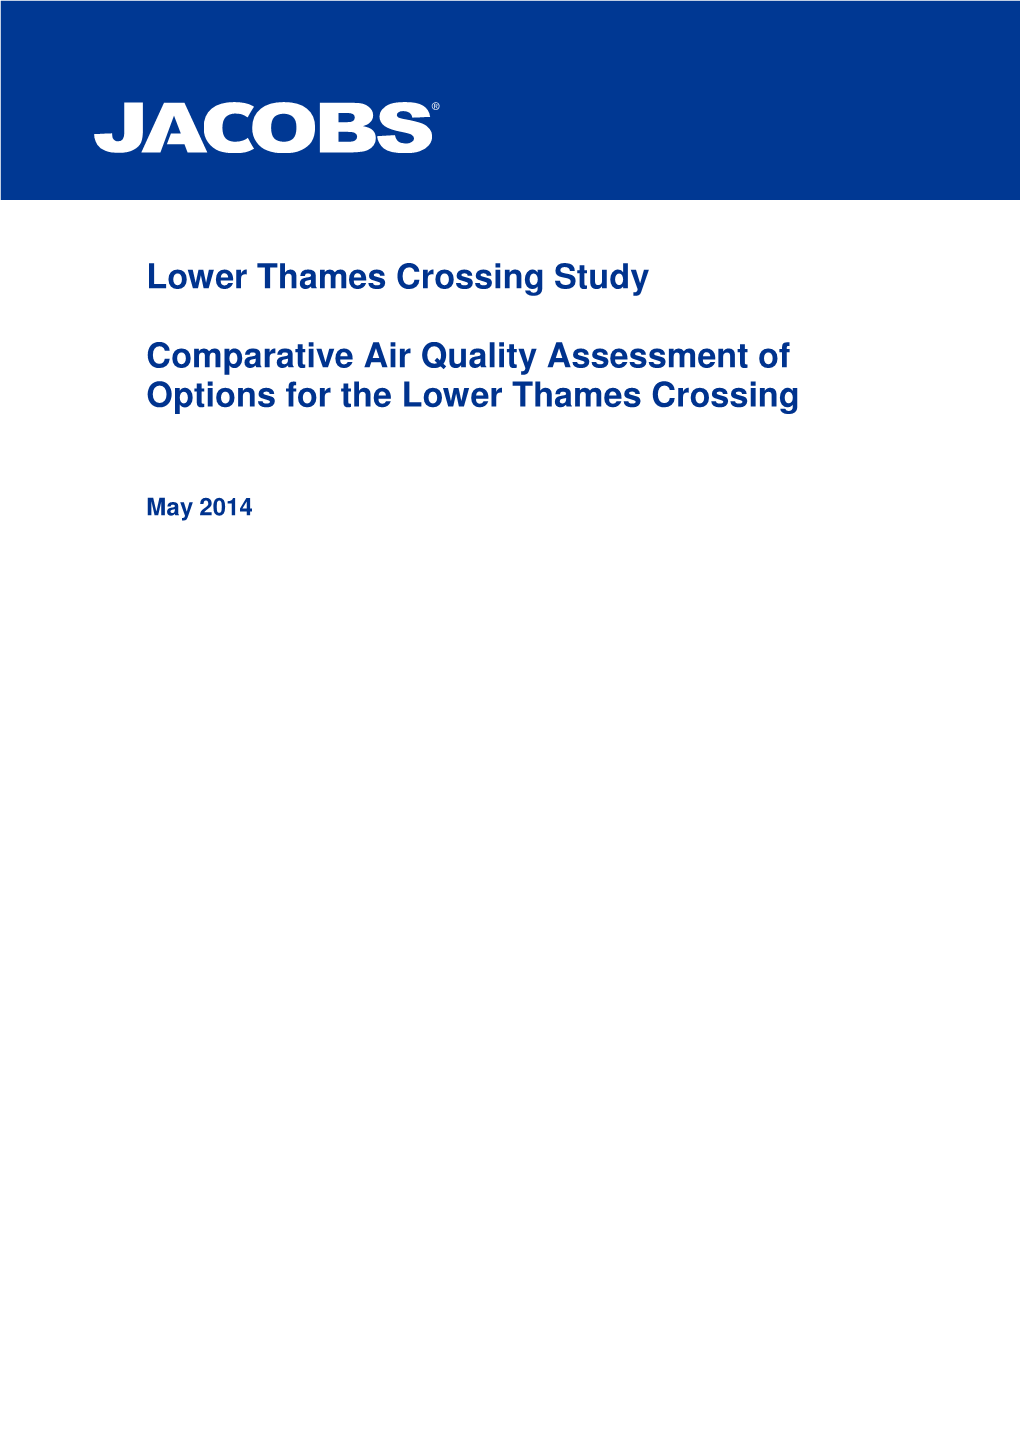 Comparative Air Quality Assessment of Options for the Lower Thames Crossing